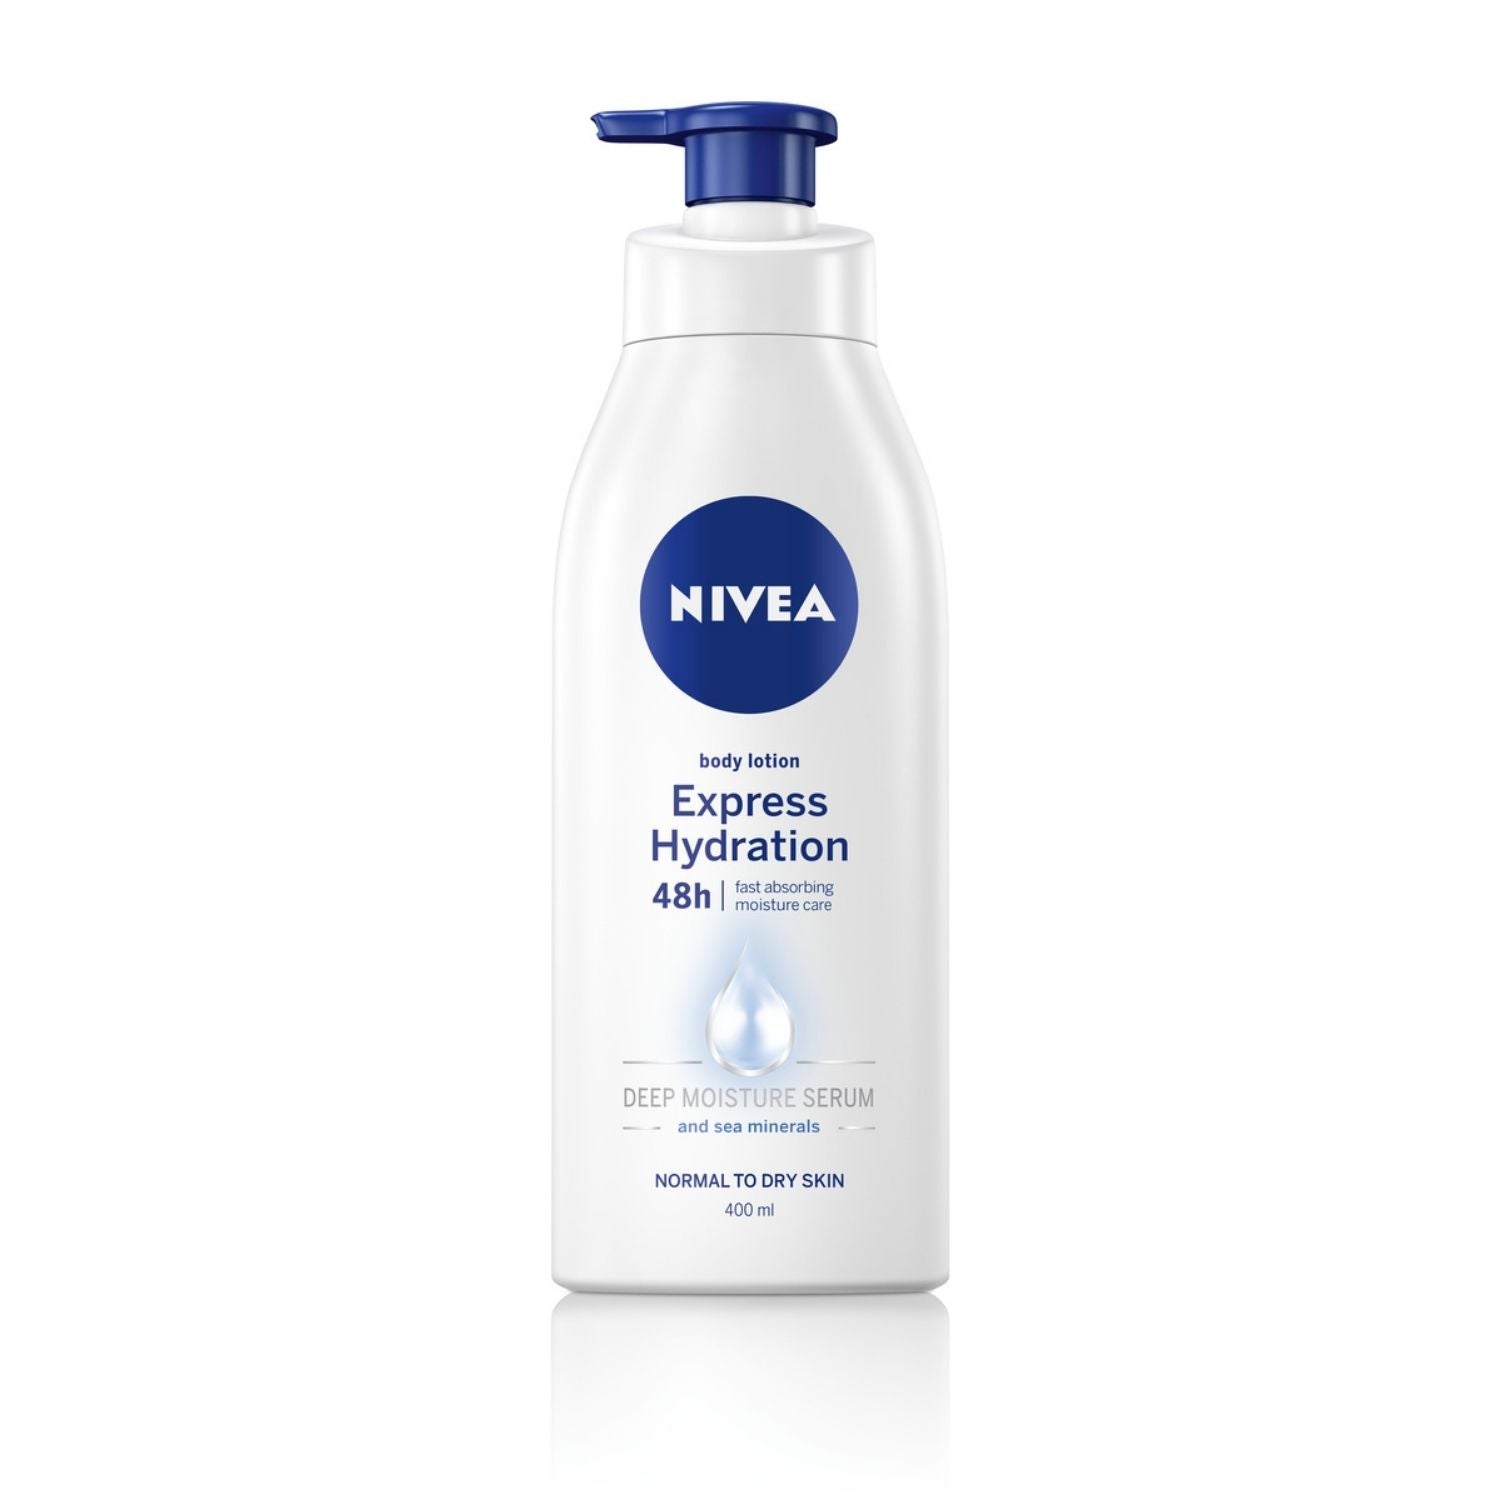 Nivea Express Hydration Body Lotion Pump - 400ml 1 Shaws Department Stores